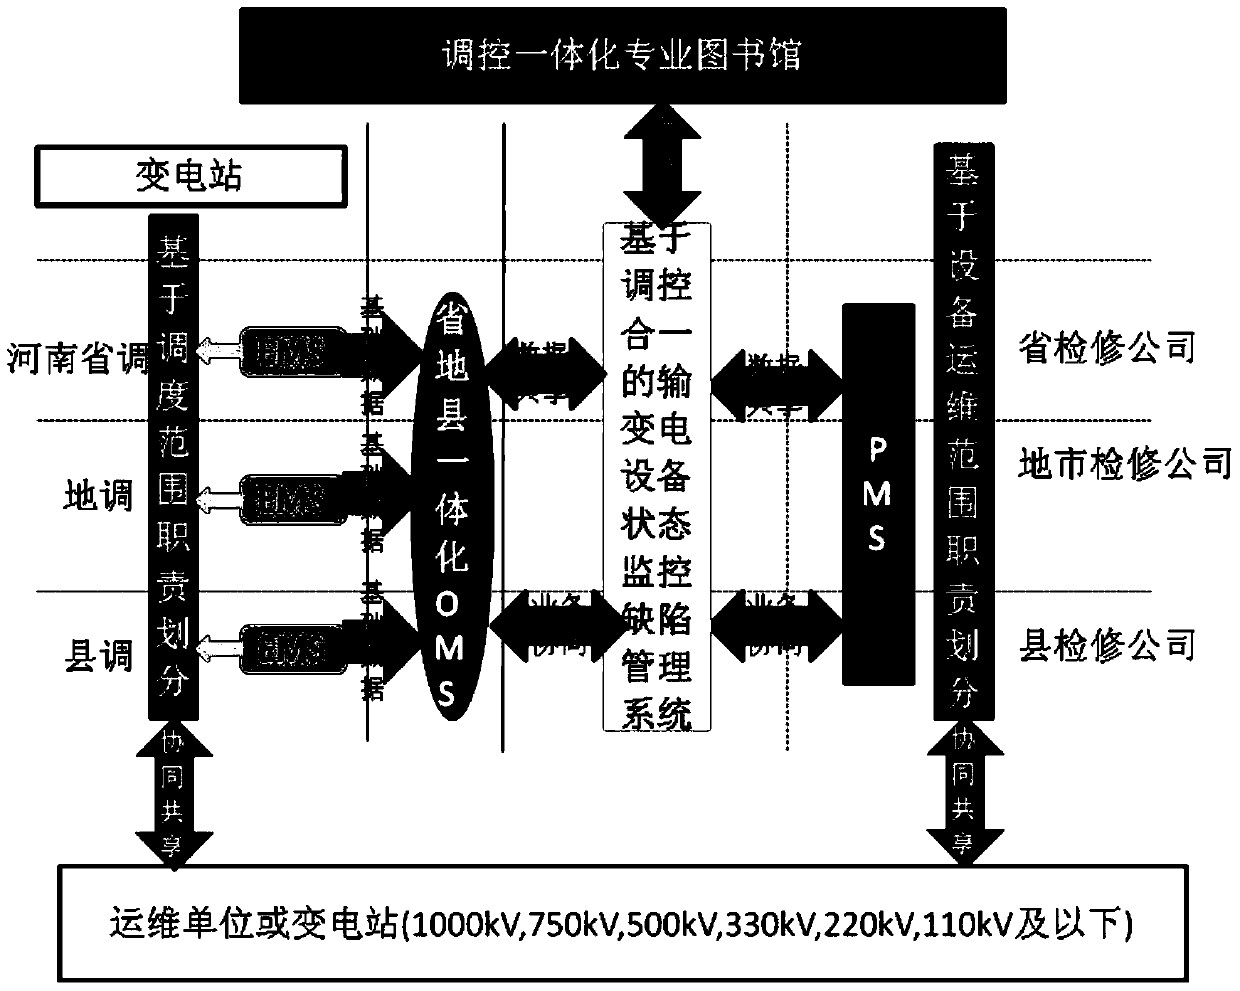 Defect management system and method for state monitoring of power transmission and transformation equipment based on the integration of regulation and control